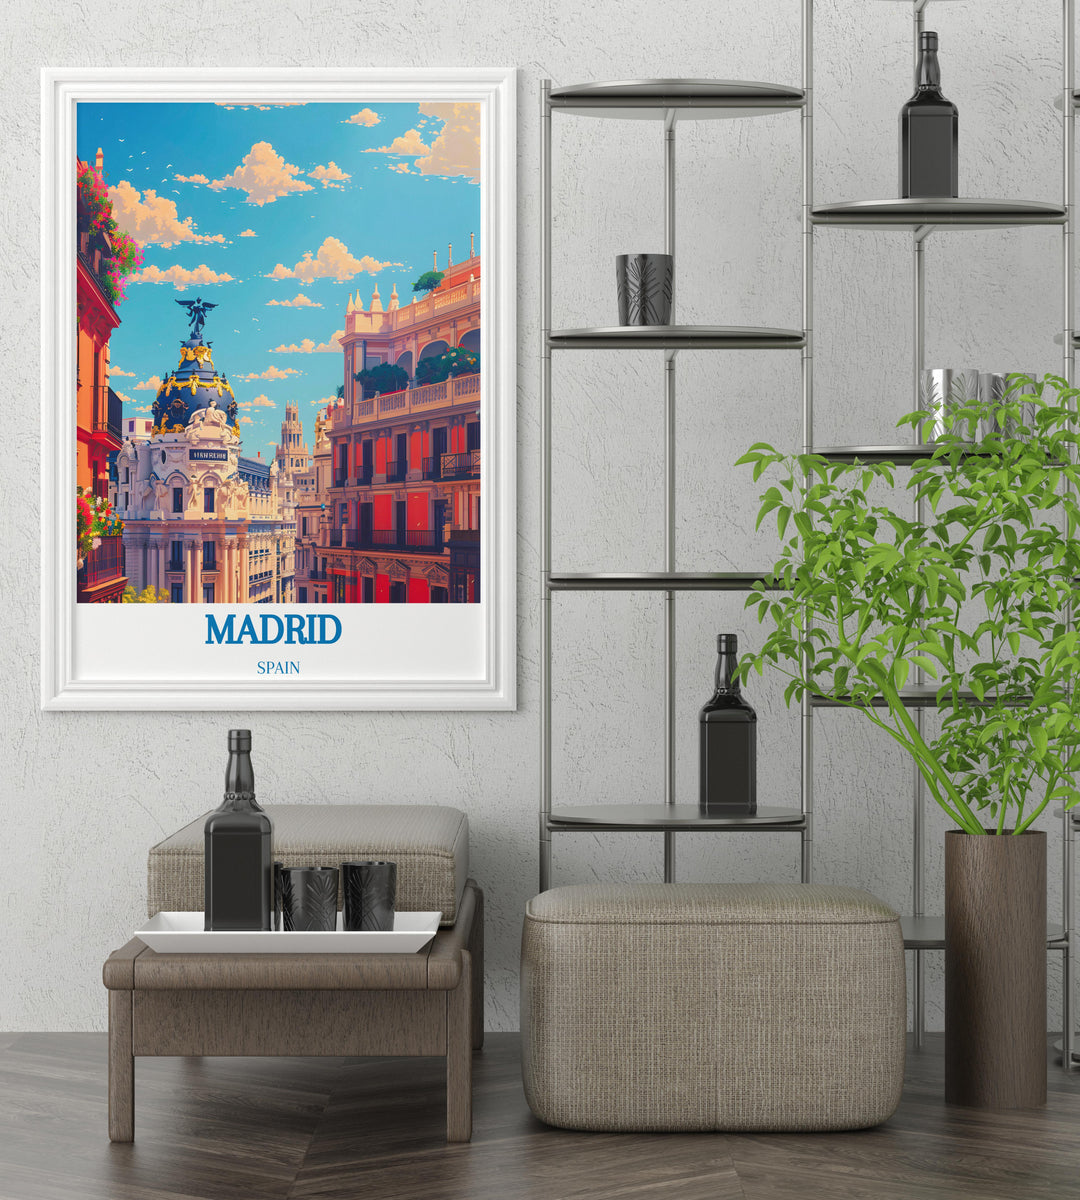 Artwork showcasing Madrids bustling street life, a great addition to any living space.